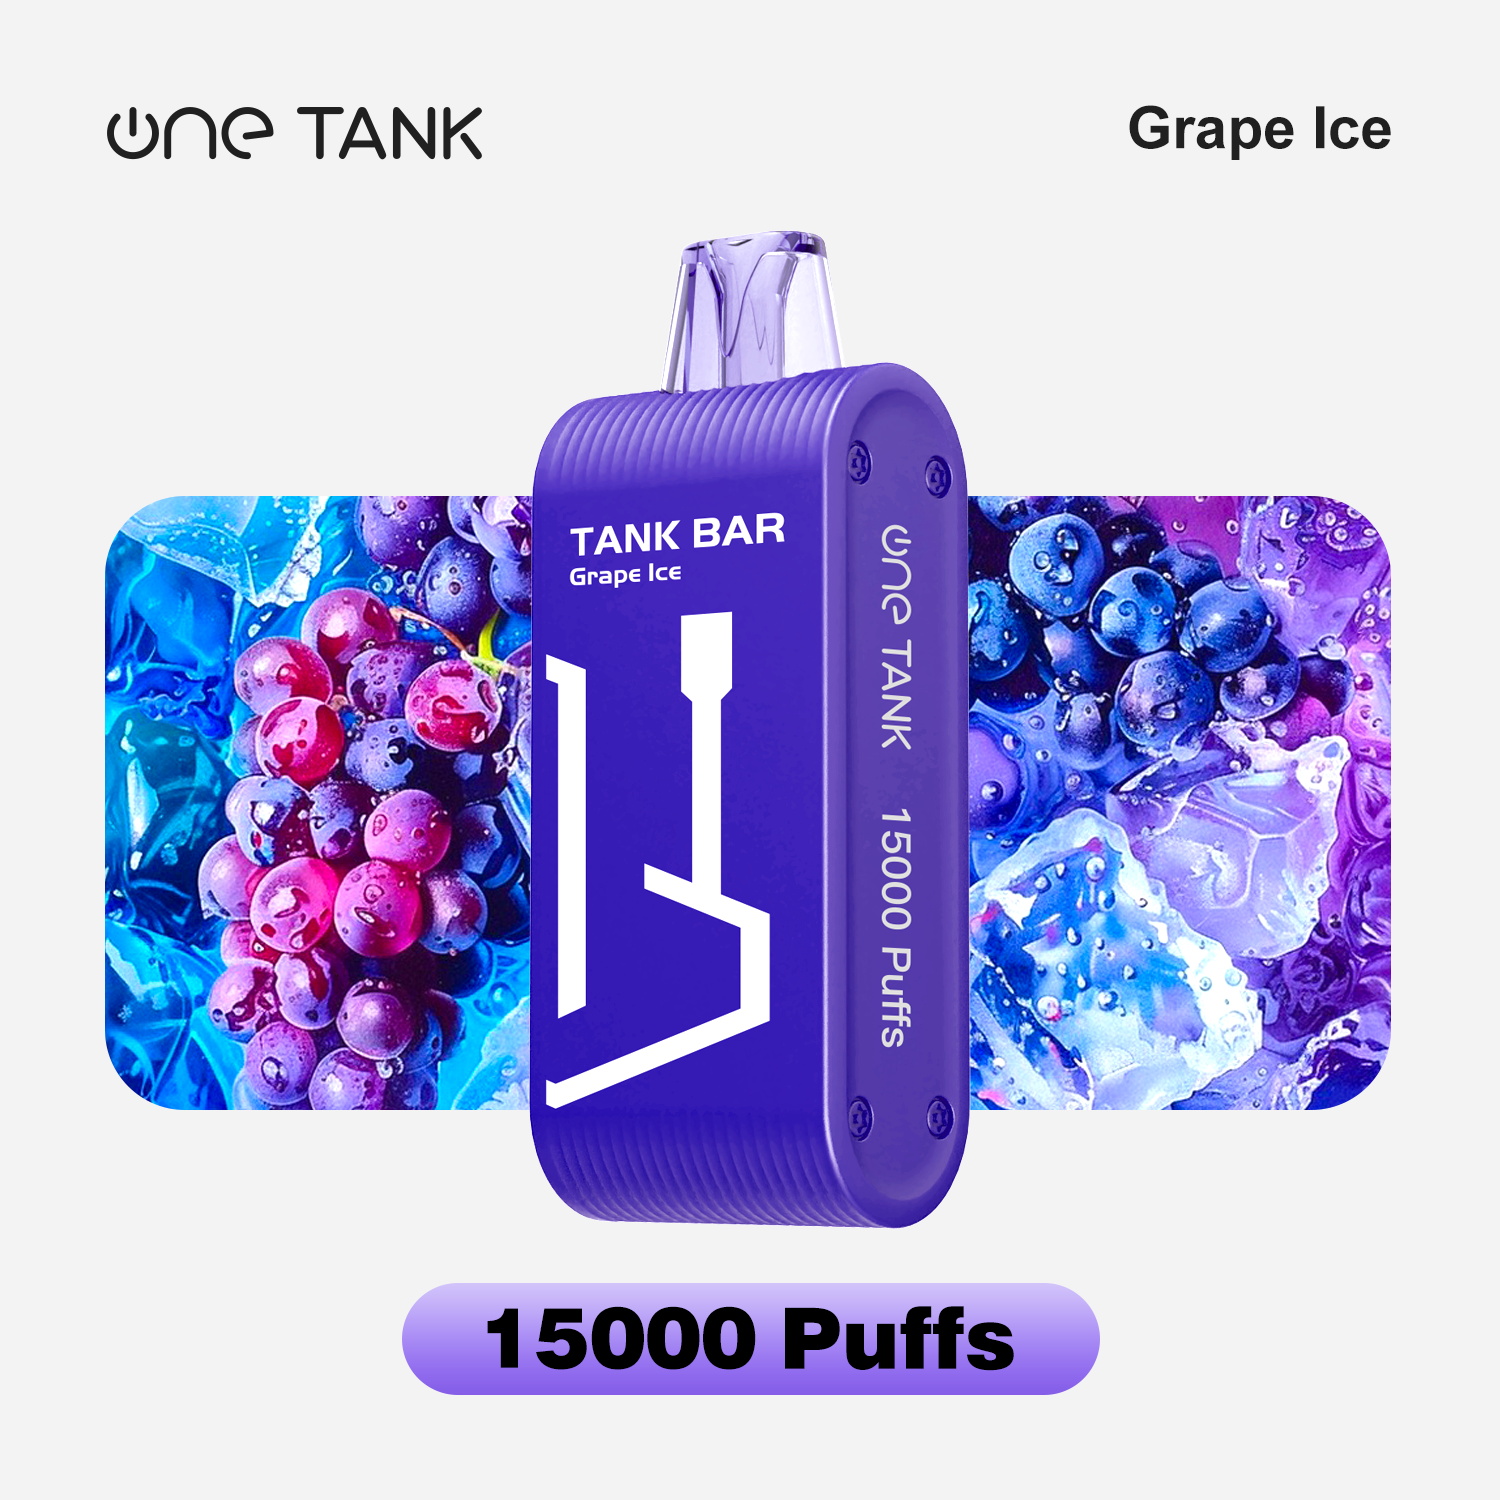 Grape lce flavour tank bar New large screen electronic cigarettes